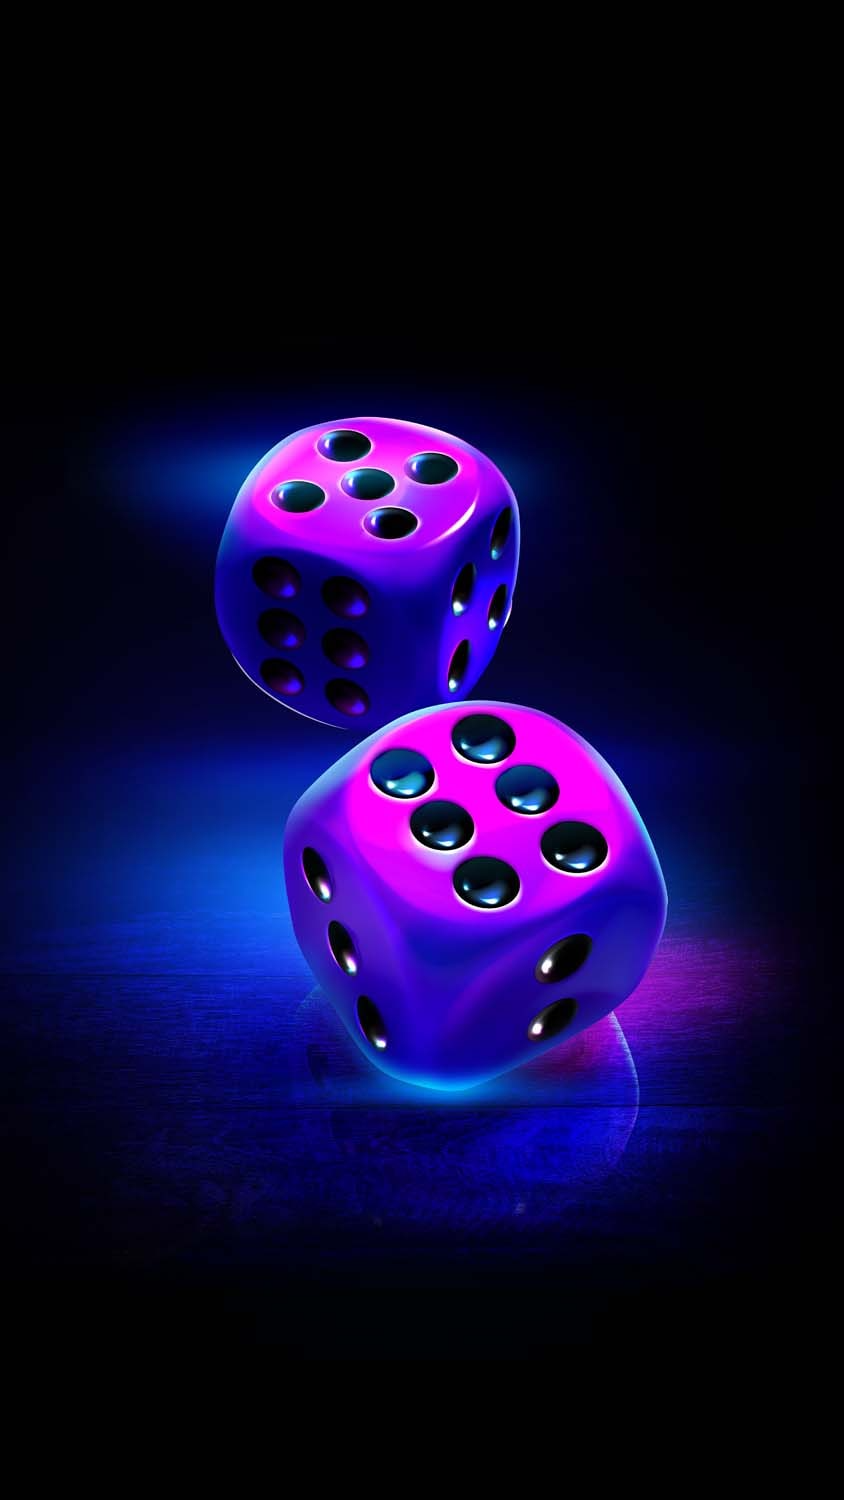 The Poker Dice IPhone Wallpaper HD  IPhone Wallpapers